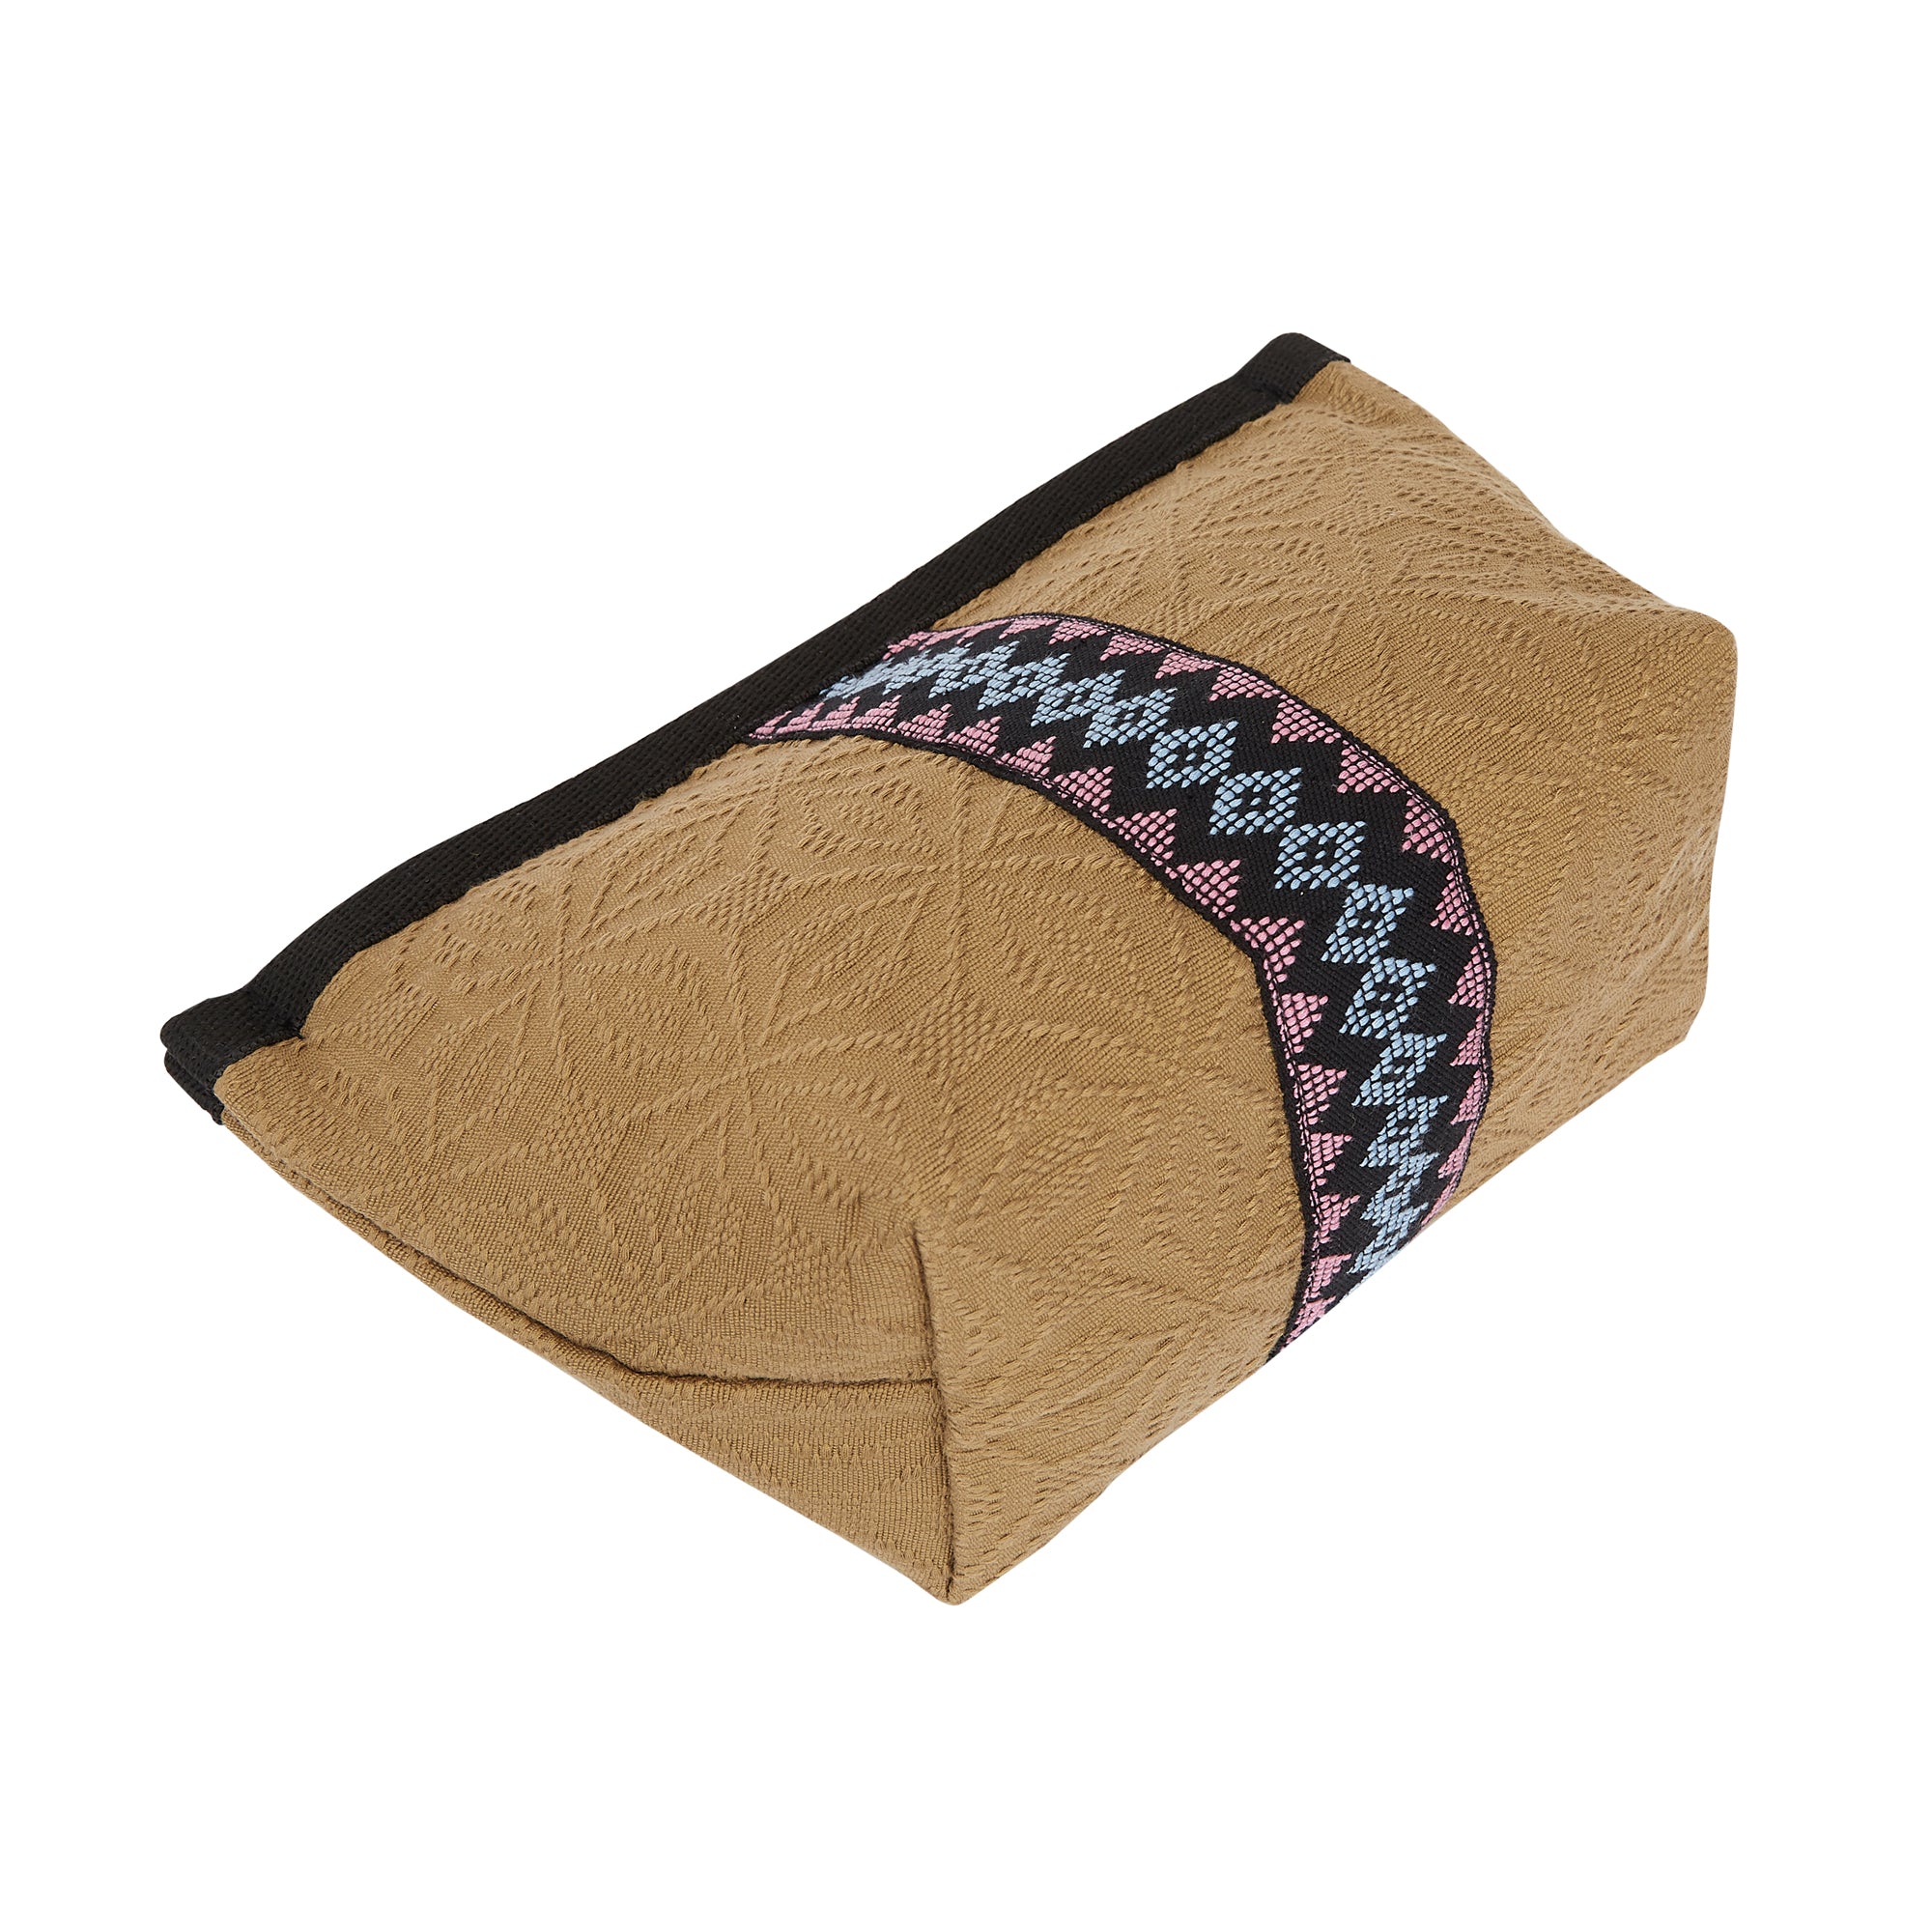 Brown Palawan - Maranao Collectible Limited Edition Pouch